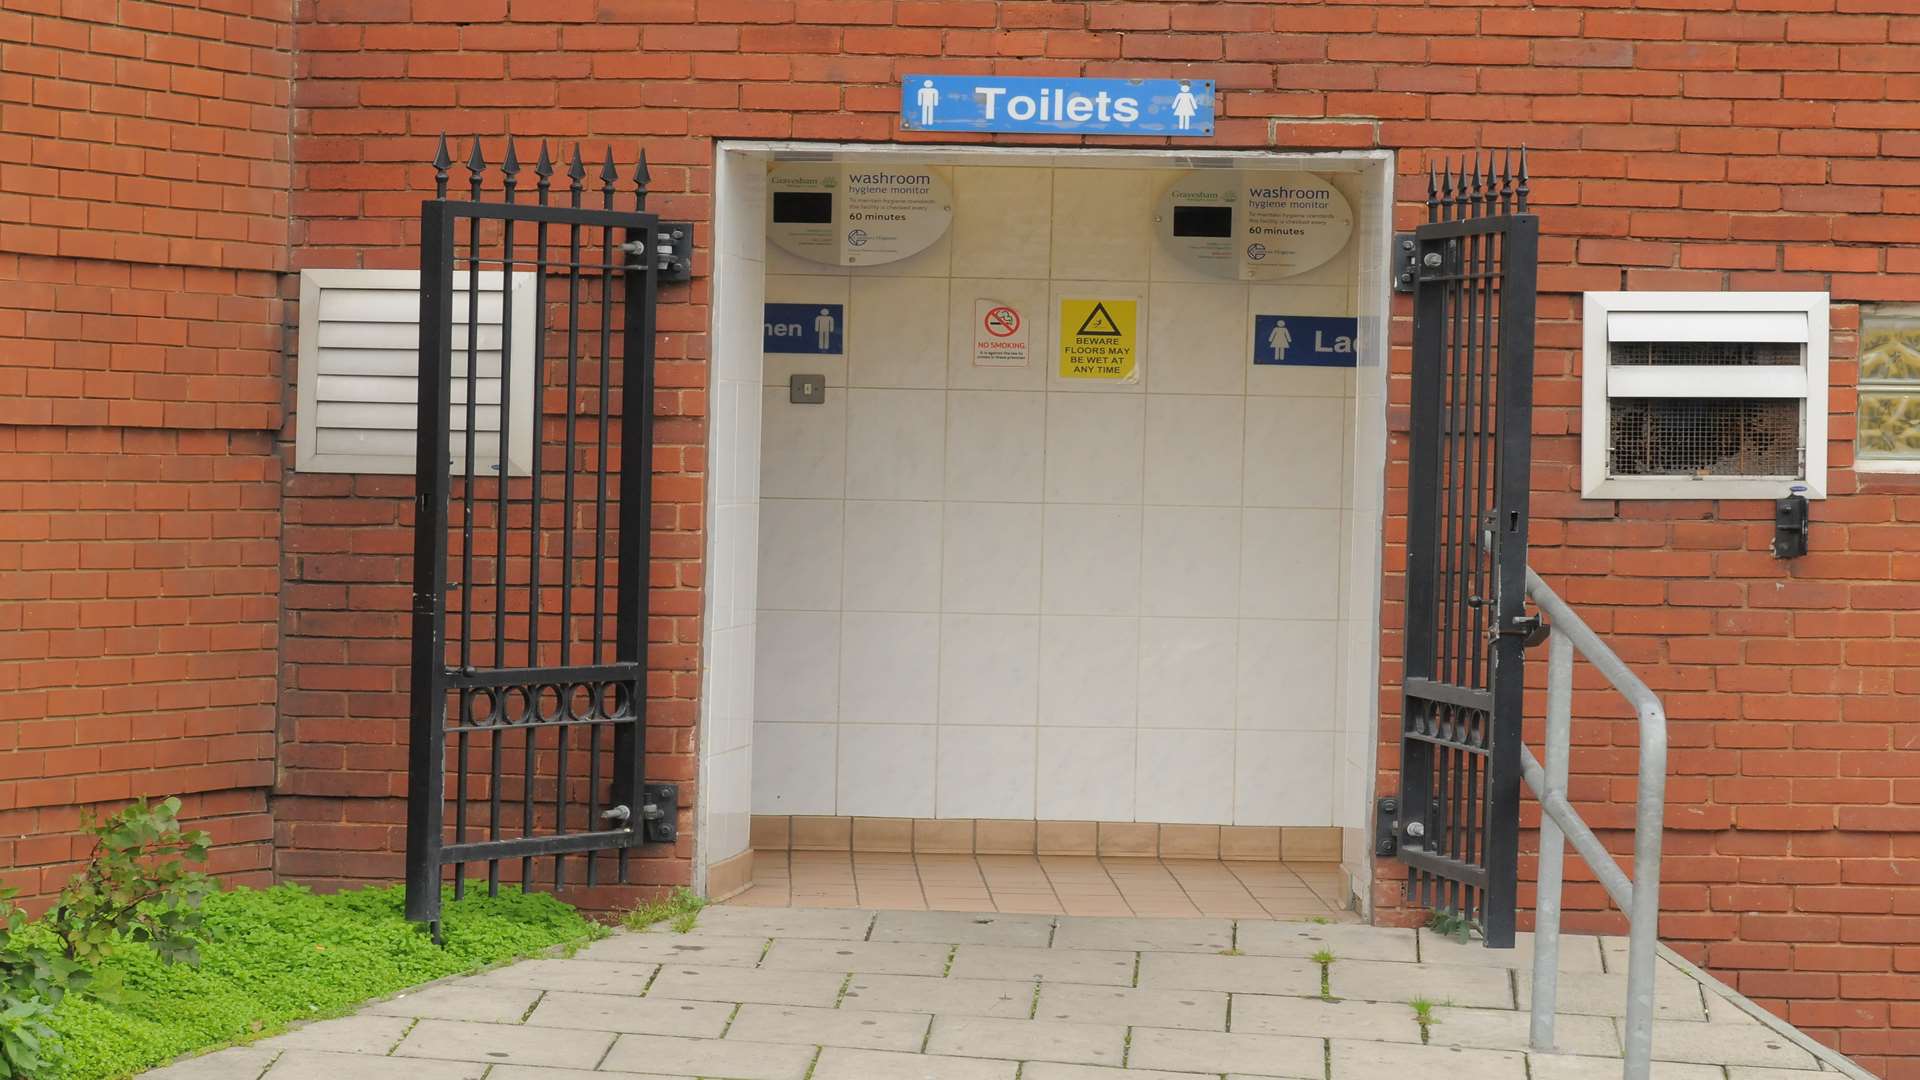 Toilets, Clive Road, Gravesend